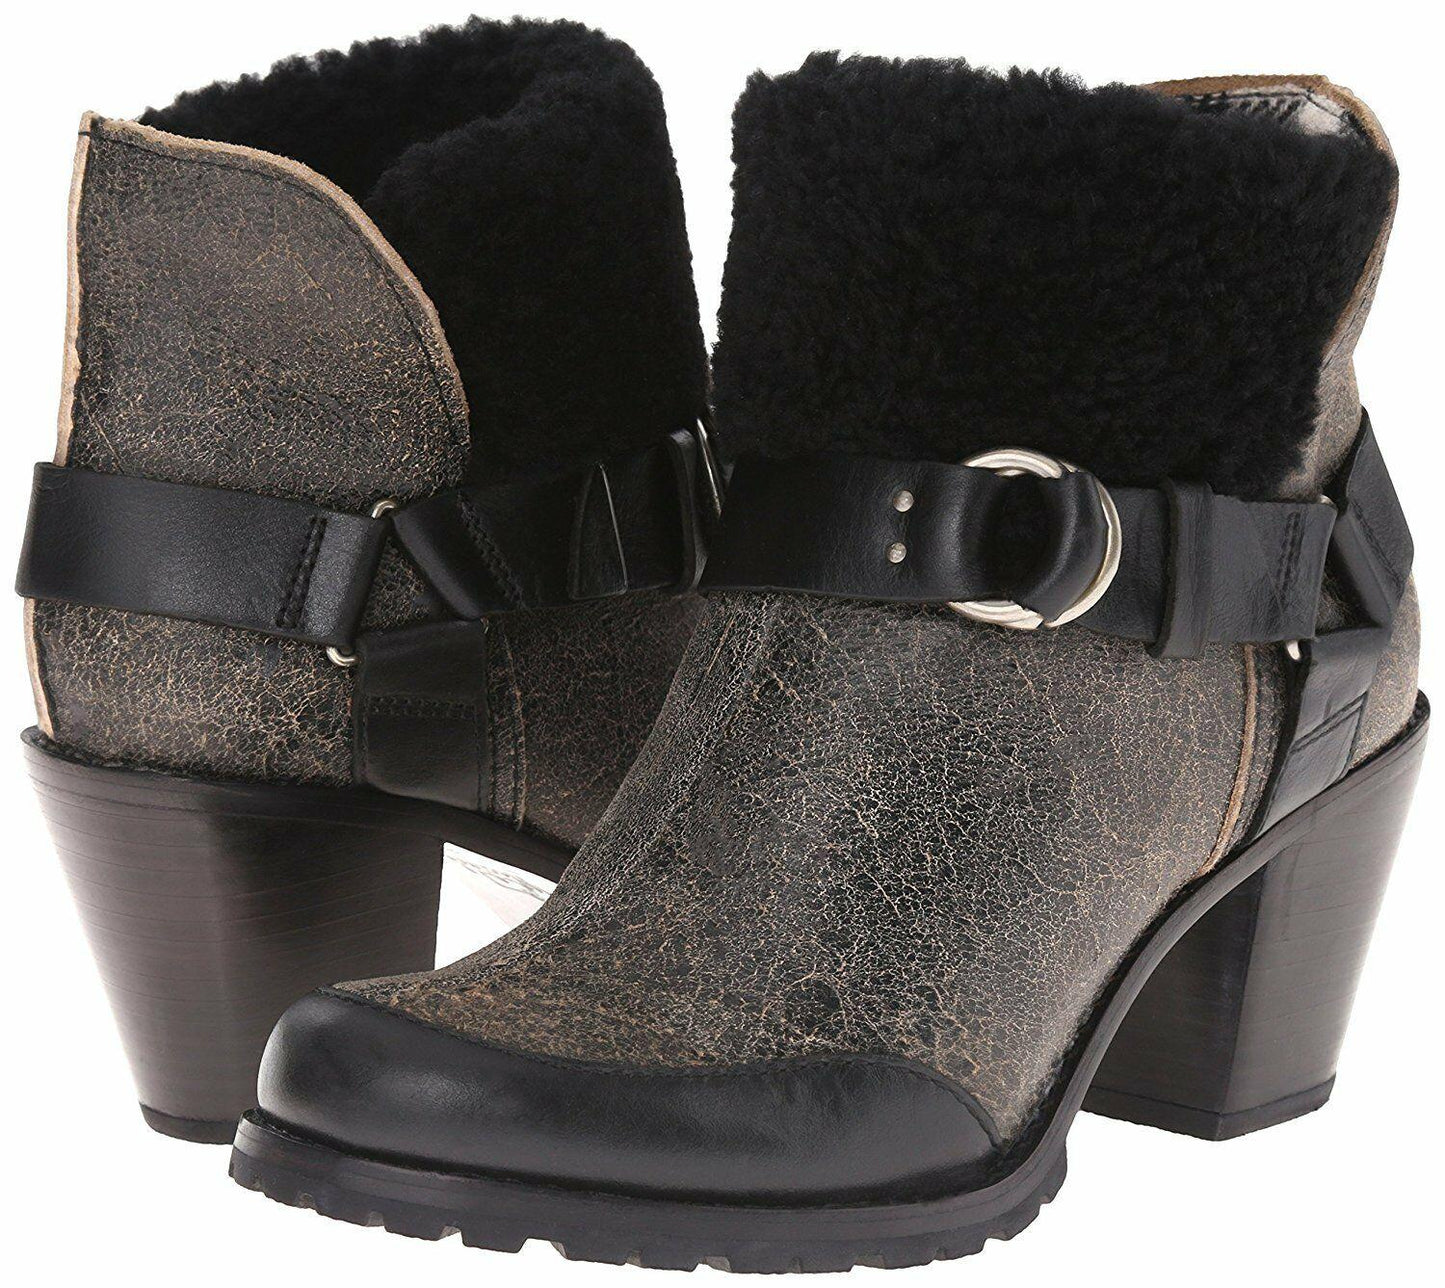 Woolrich Miss Alice Harness Boot Booties Black Crackle Leather Women's Sz 6 M - SVNYFancy